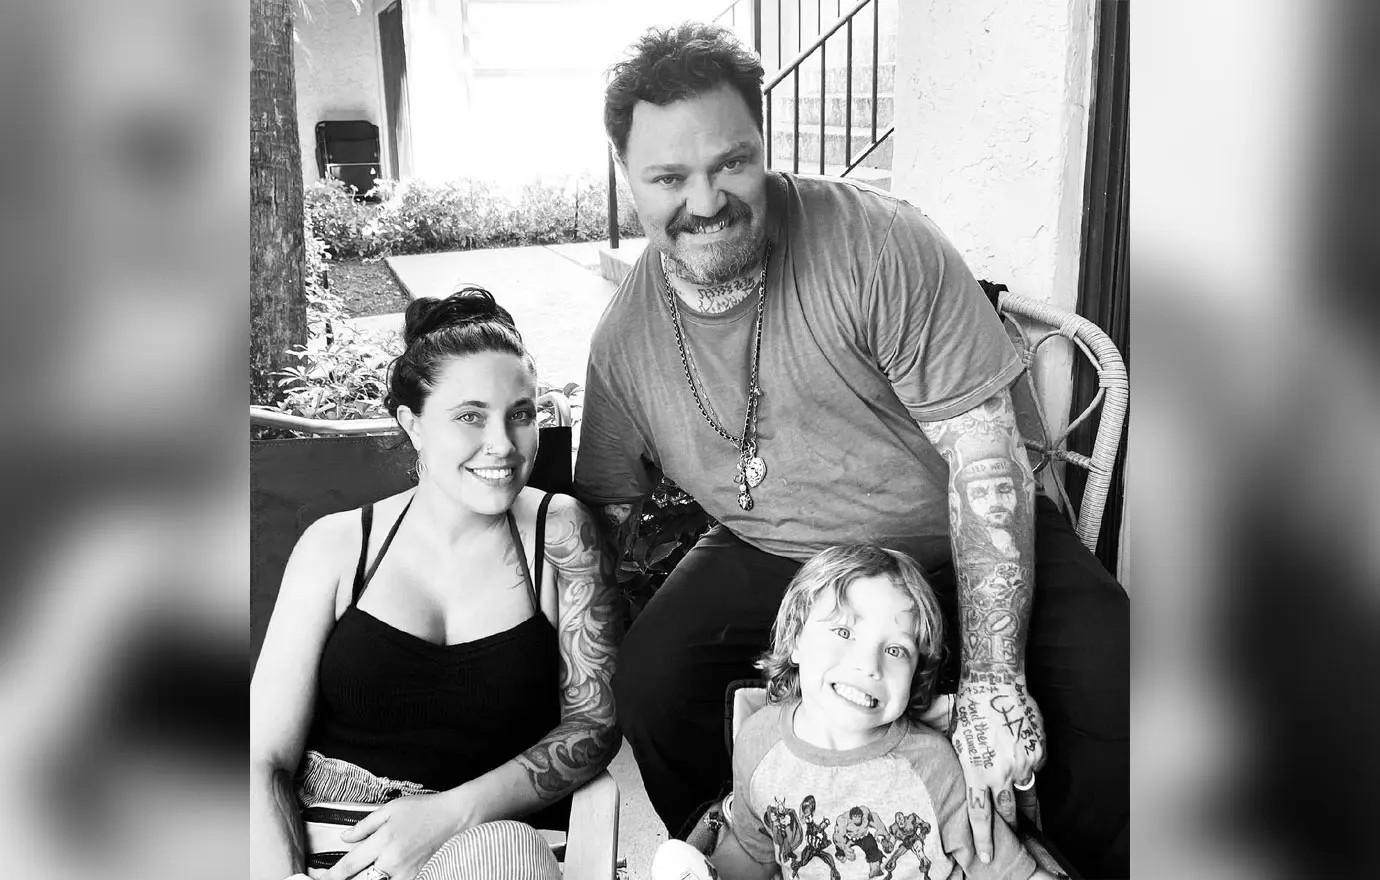 Bam Margera Cut Off From Contact With Son Phoenix After Arrest